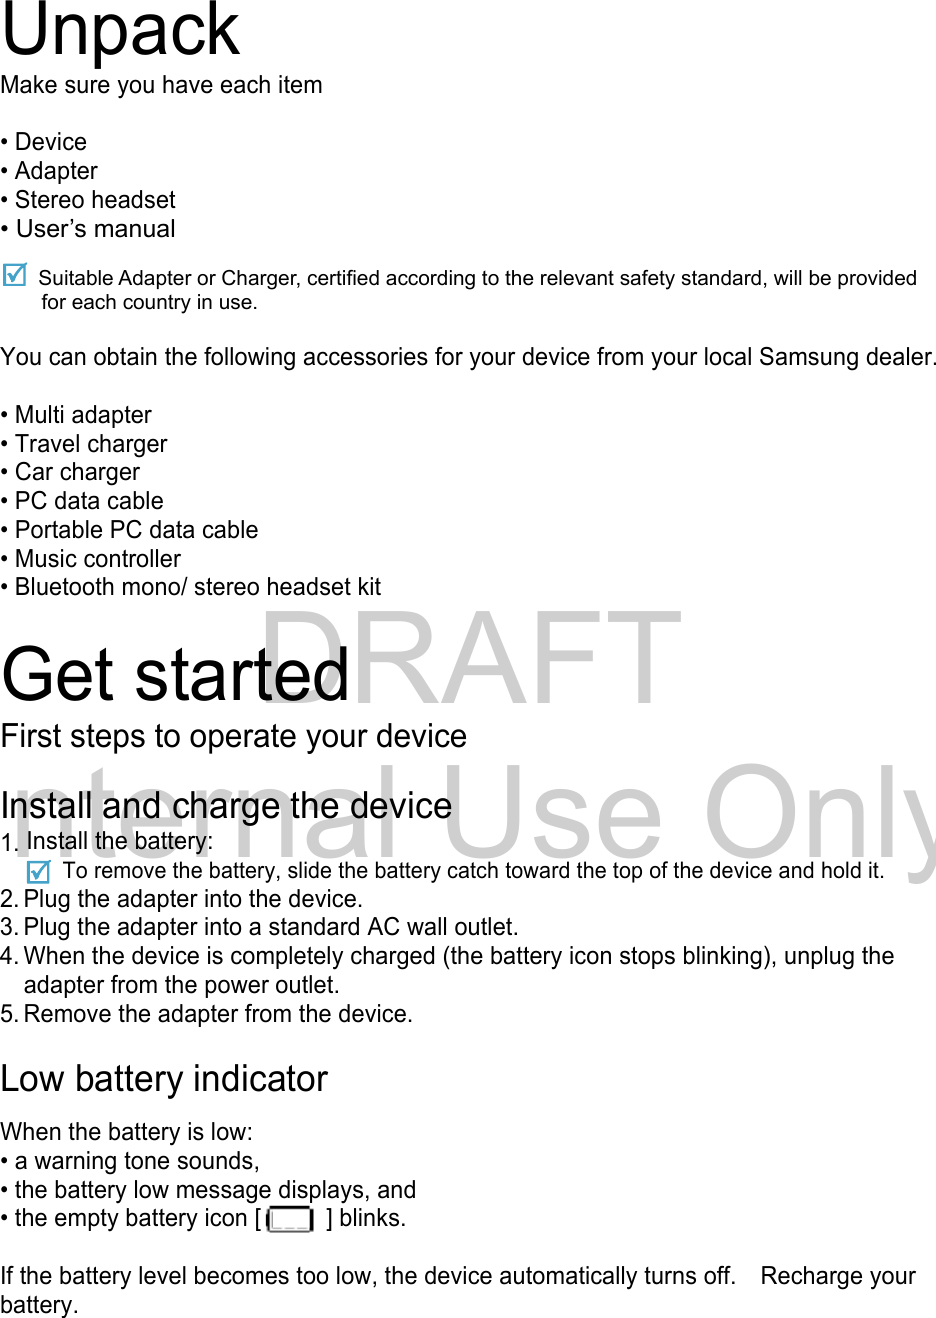 DRAFT Internal Use OnlyUnpack Make sure you have each item  • Device • Adapter • Stereo headset • User’s manual  Suitable Adapter or Charger, certified according to the relevant safety standard, will be provided for each country in use.  You can obtain the following accessories for your device from your local Samsung dealer.  • Multi adapter • Travel charger • Car charger • PC data cable • Portable PC data cable • Music controller • Bluetooth mono/ stereo headset kit  Get started First steps to operate your device  Install and charge the device 1. Install the battery:     To remove the battery, slide the battery catch toward the top of the device and hold it. 2. Plug the adapter into the device. 3. Plug the adapter into a standard AC wall outlet. 4. When the device is completely charged (the battery icon stops blinking), unplug the adapter from the power outlet. 5. Remove the adapter from the device.  Low battery indicator  When the battery is low: • a warning tone sounds, • the battery low message displays, and • the empty battery icon [   ] blinks.  If the battery level becomes too low, the device automatically turns off.    Recharge your battery.   